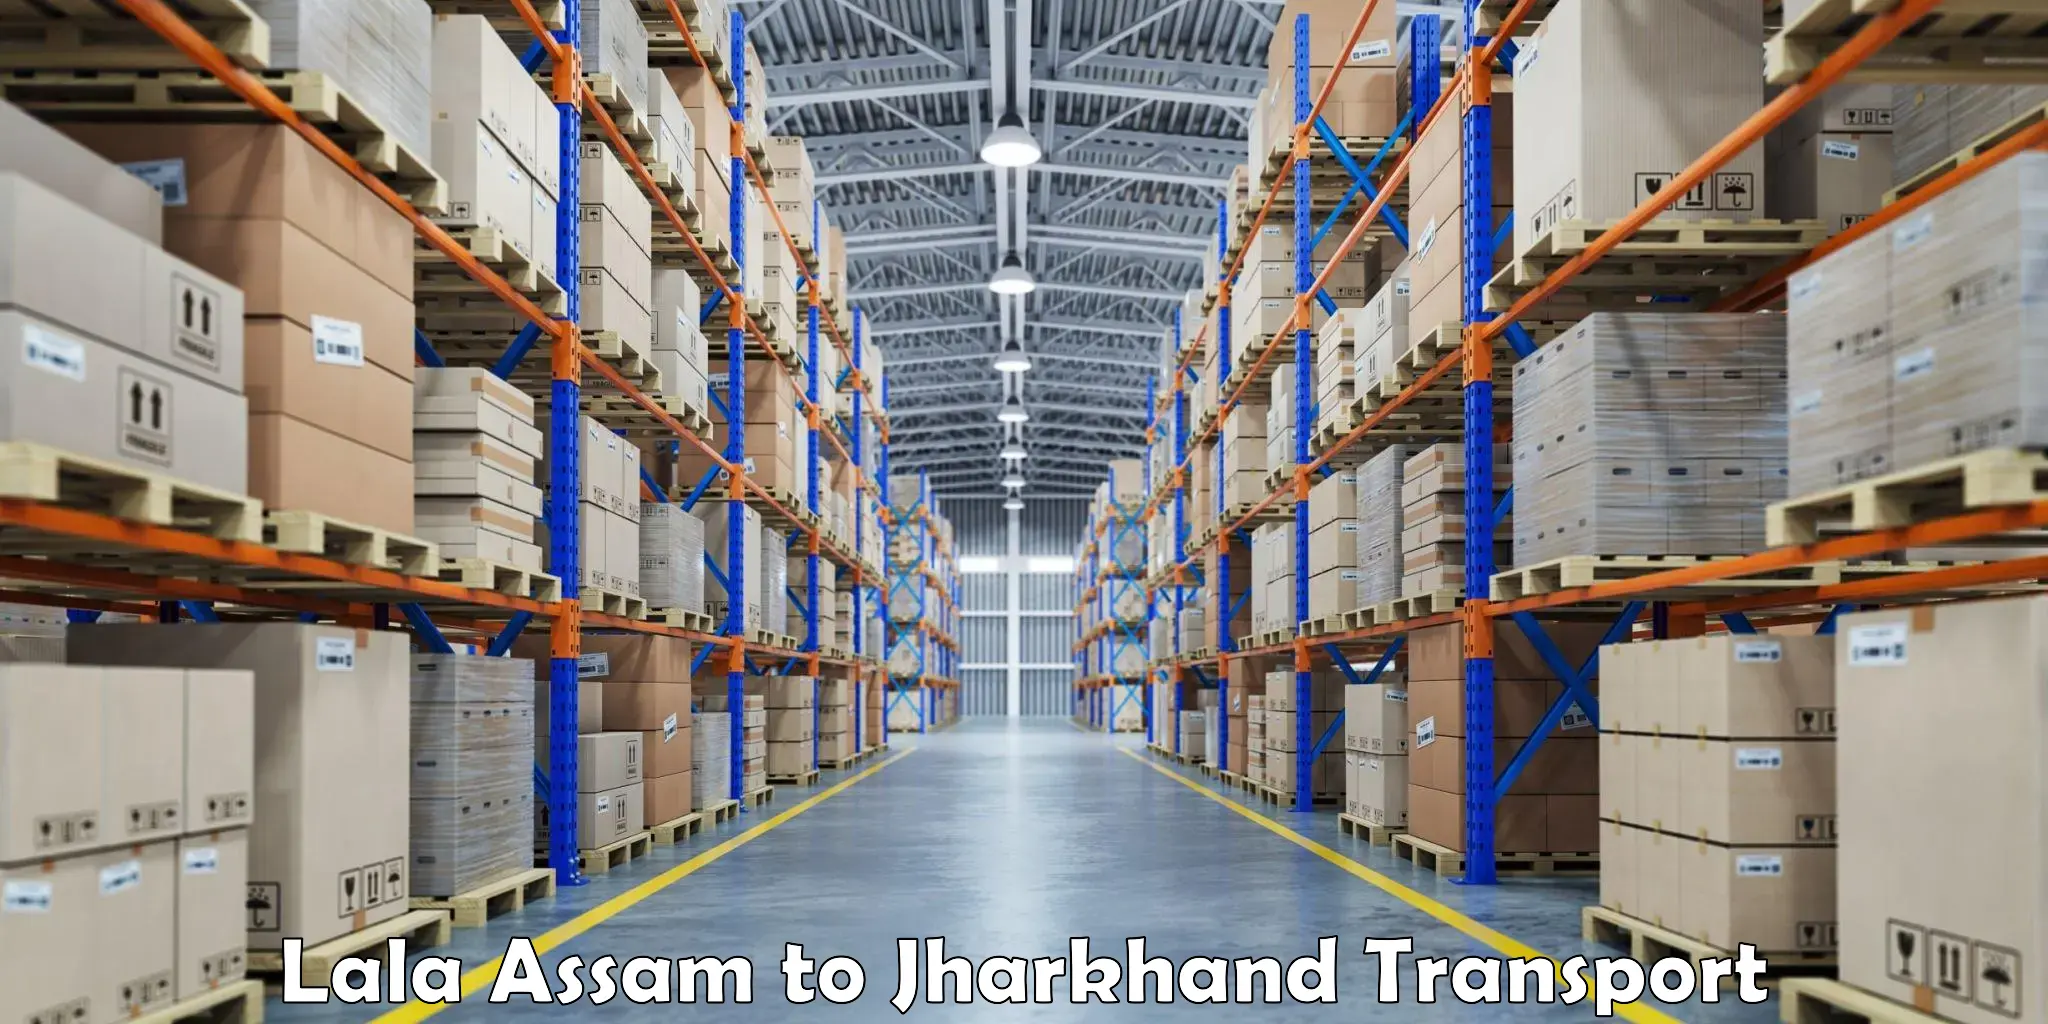 Road transport online services in Lala Assam to IIT Dhanbad